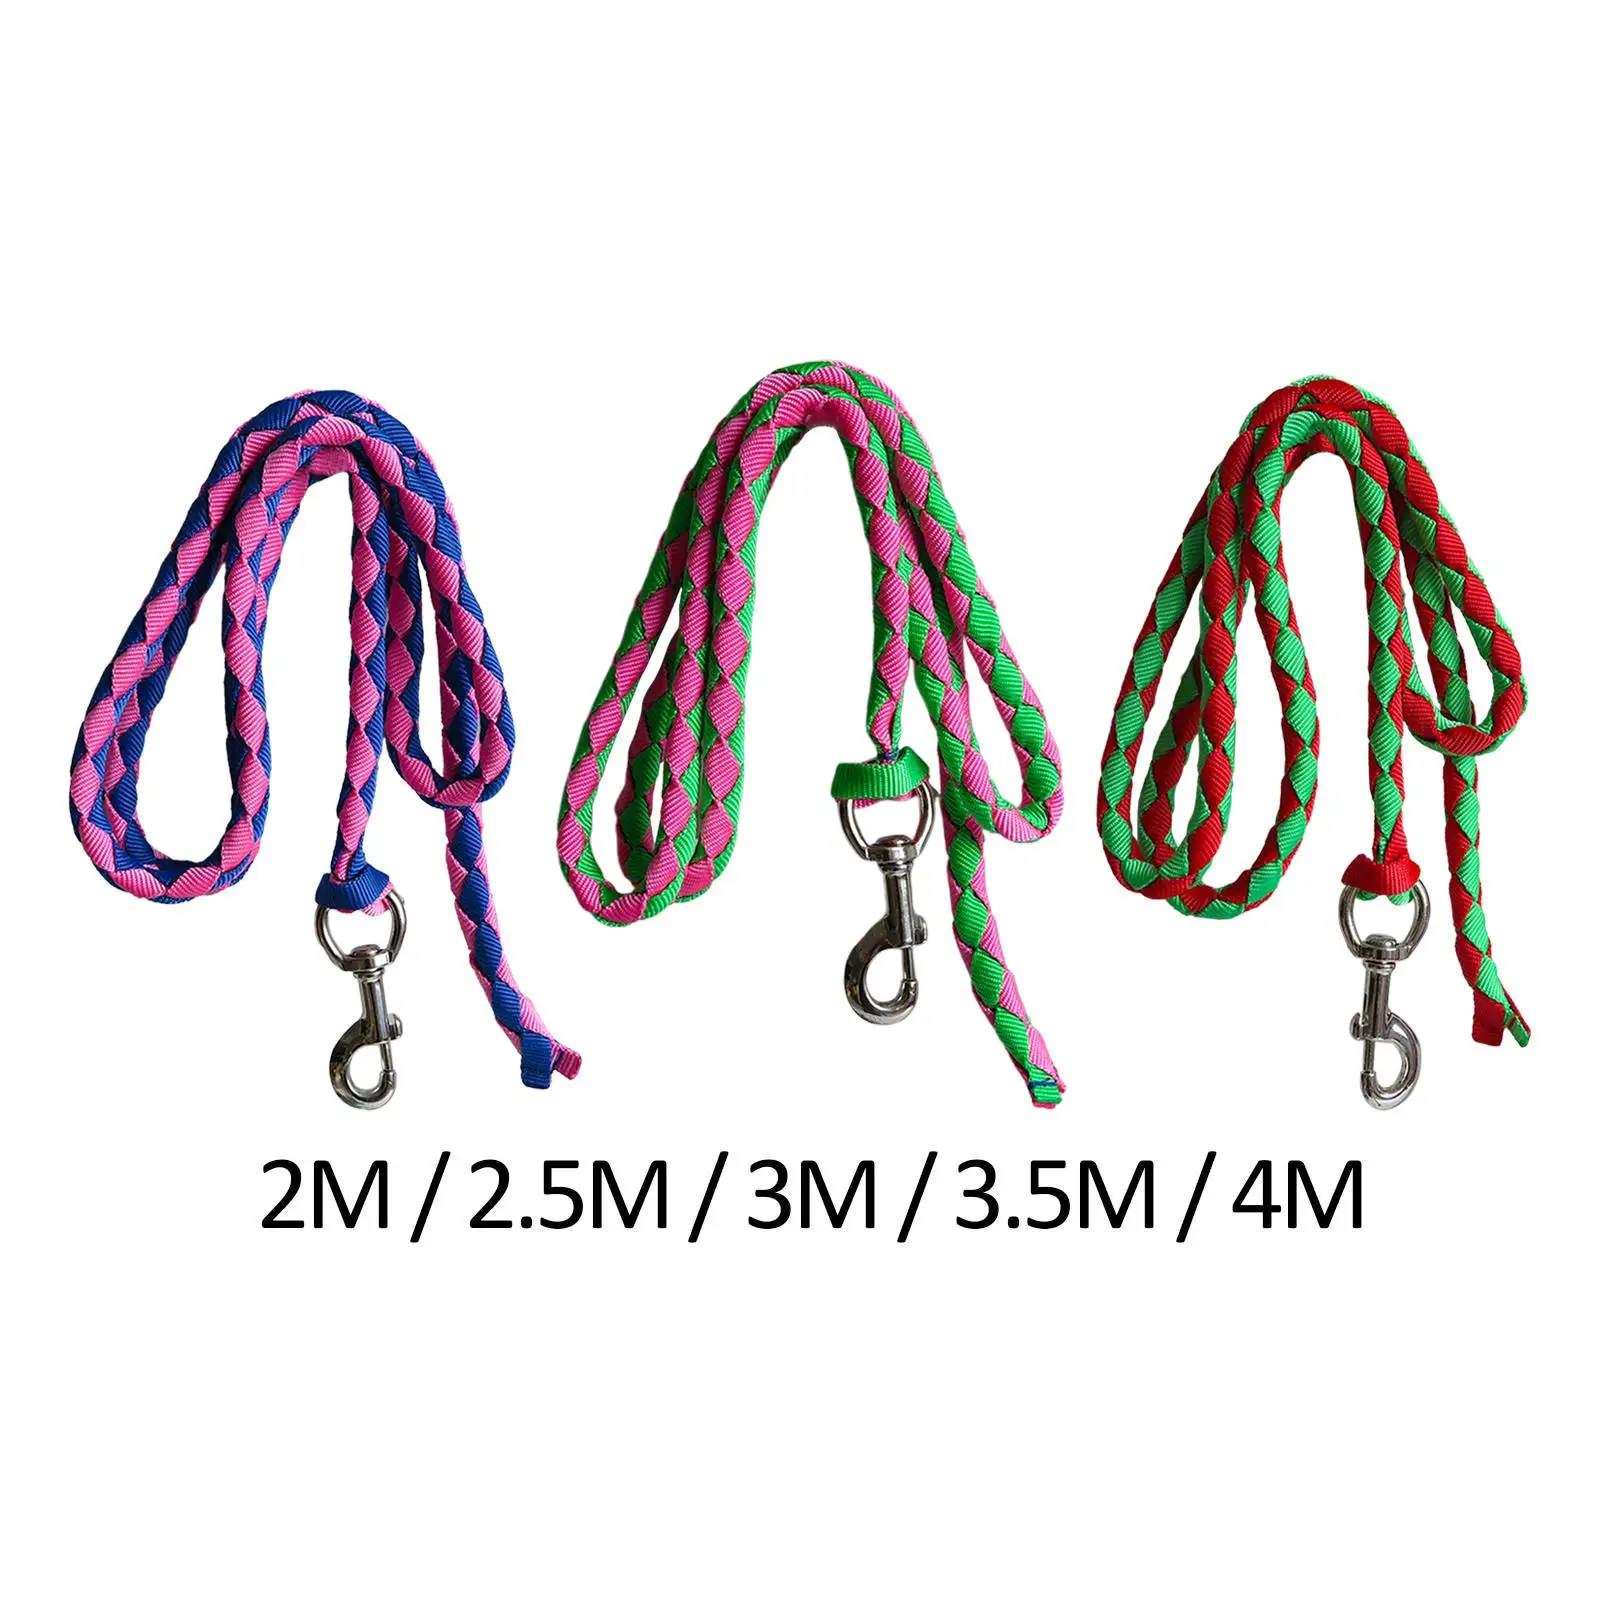 Horse leash, durable swivel buckle, horse leash, rope cord with